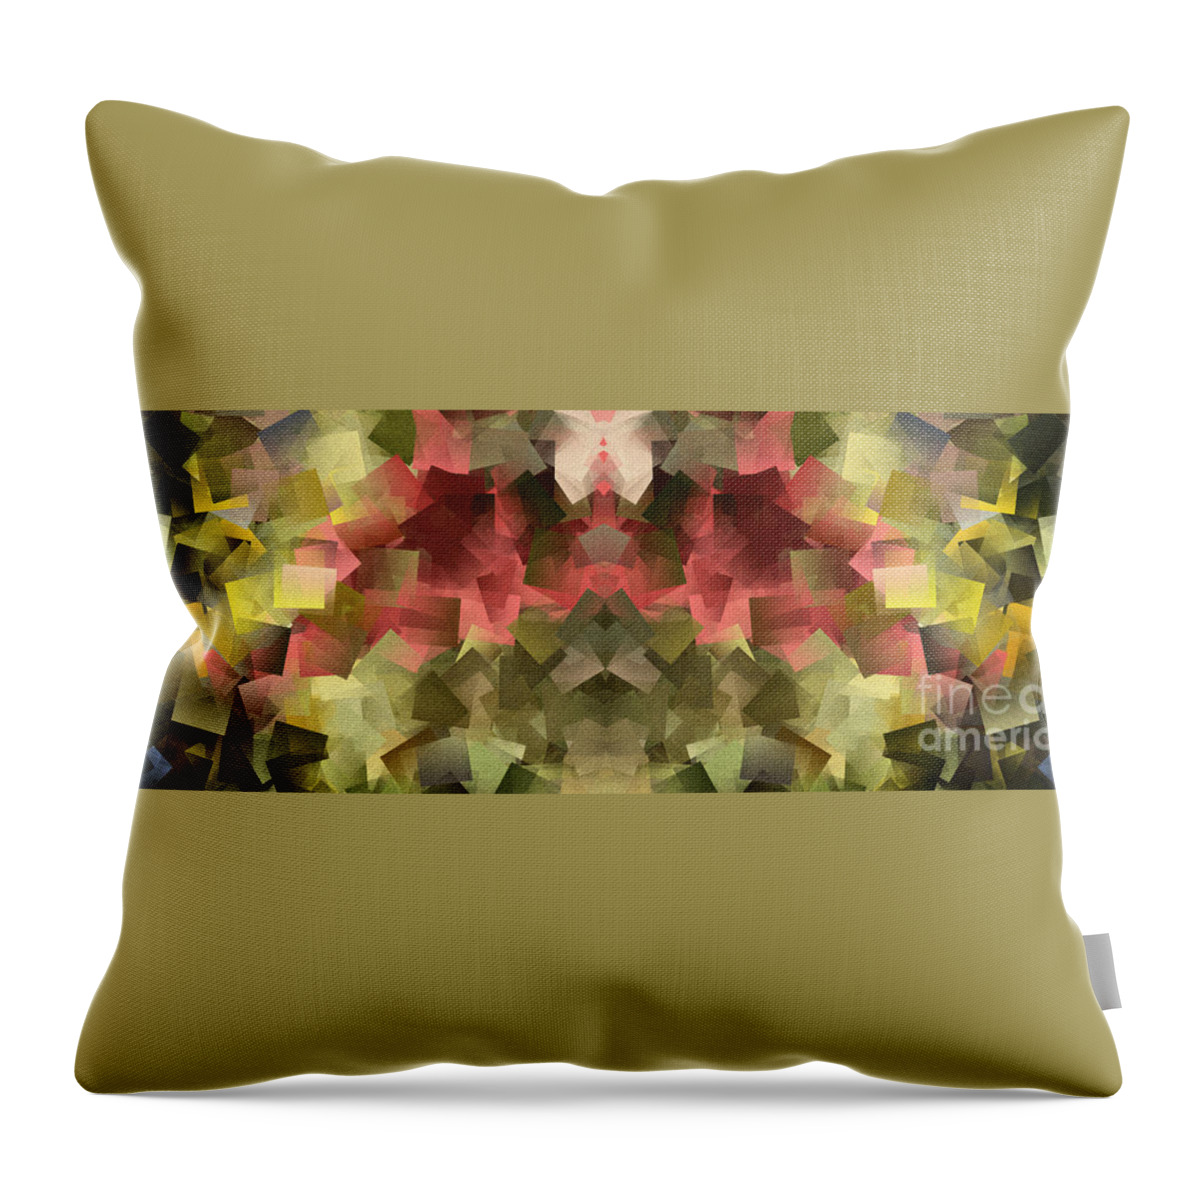 Abstract Throw Pillow featuring the digital art Sunflower Fields Abstract Squares Part 7 by Jason Freedman